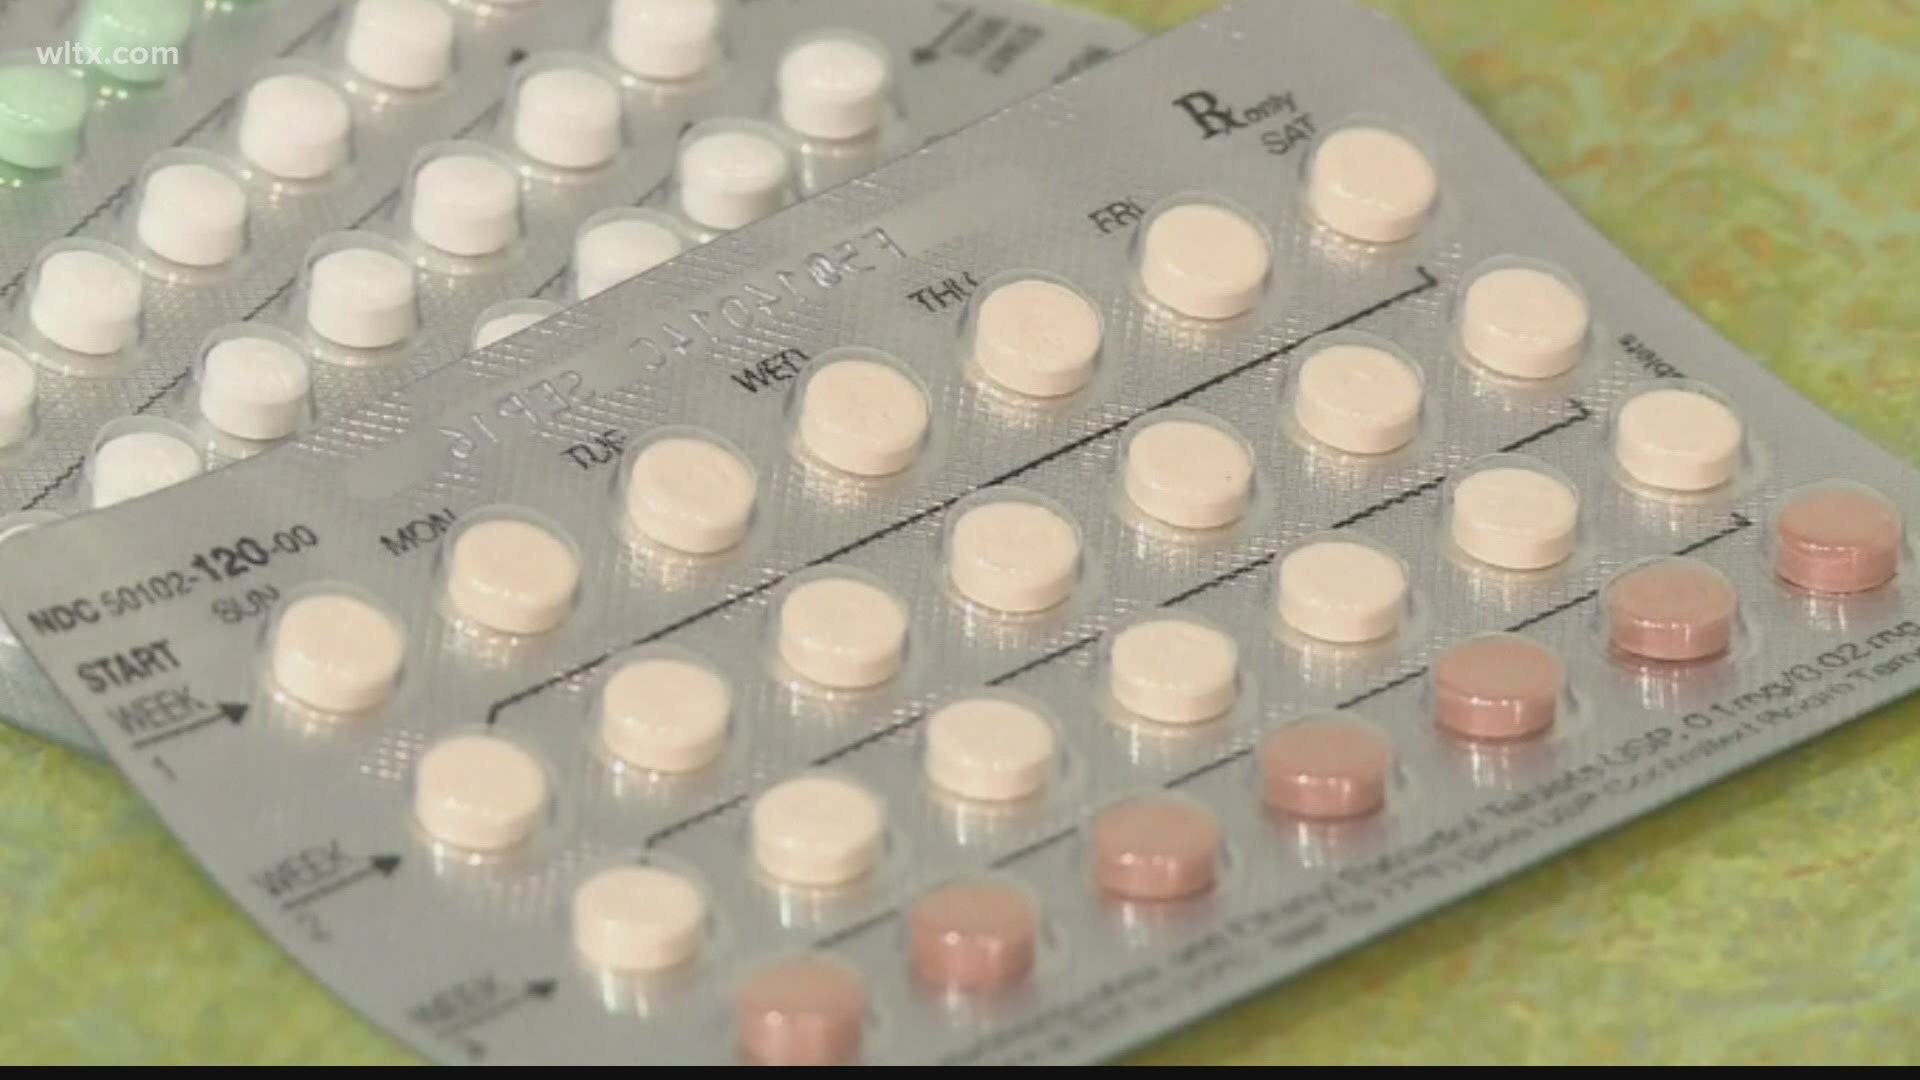 Lawmakers are pushing to allow pharmacies to offer contraception directly to women without a doctor's prescription.